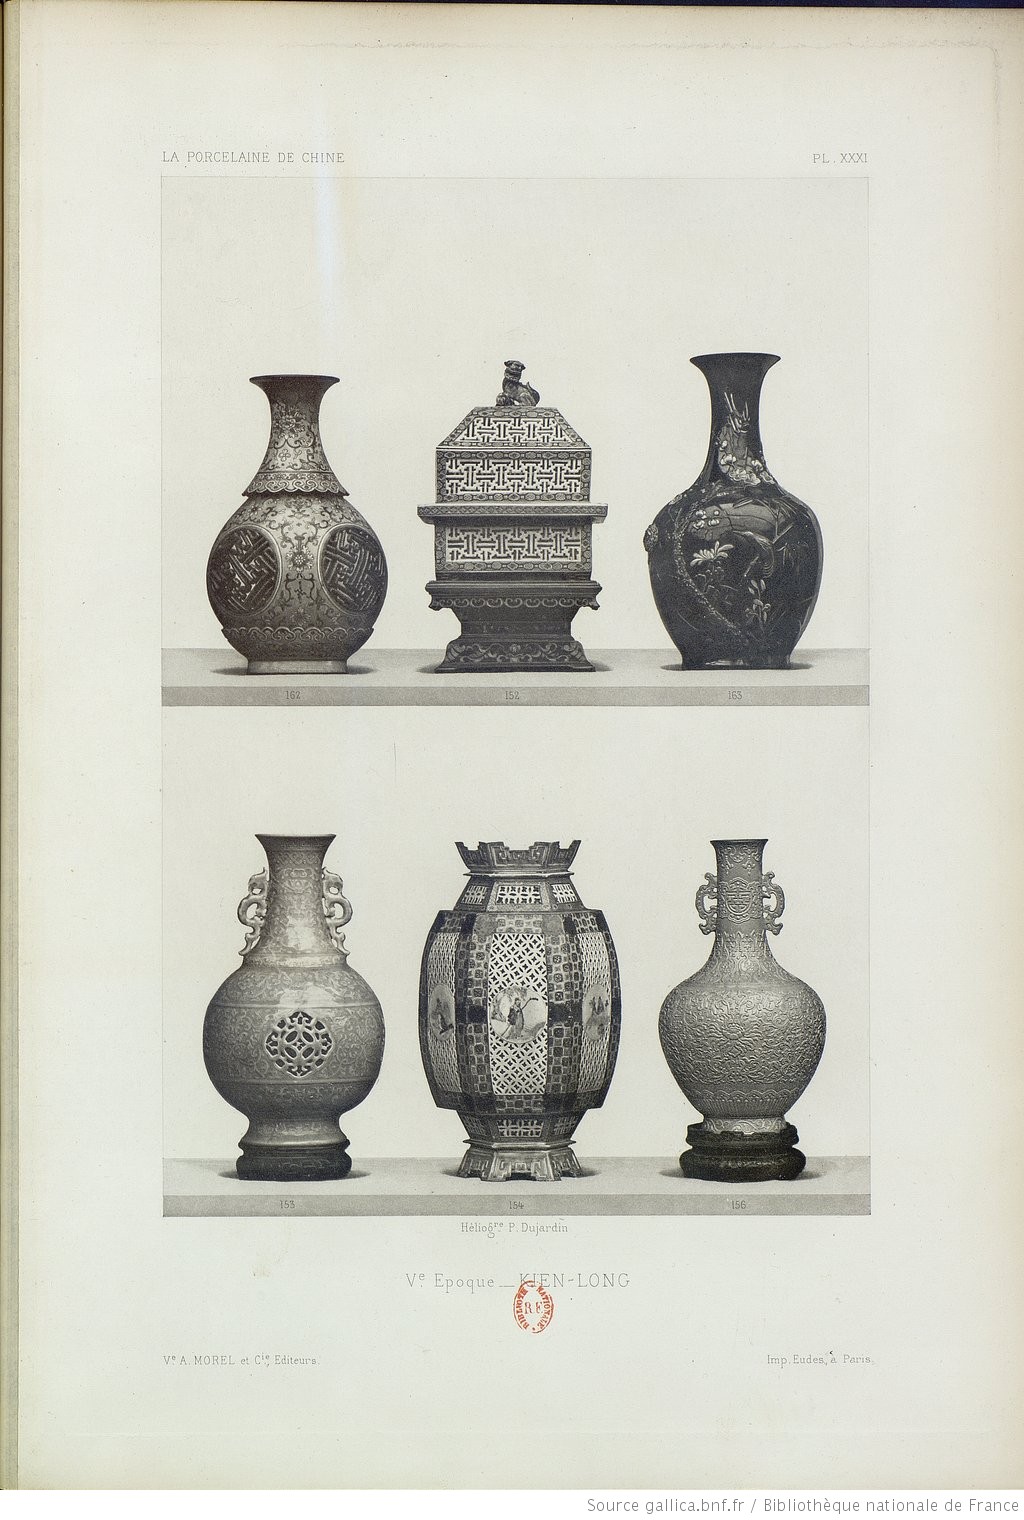 Book illustration representing Chinese porcelains.